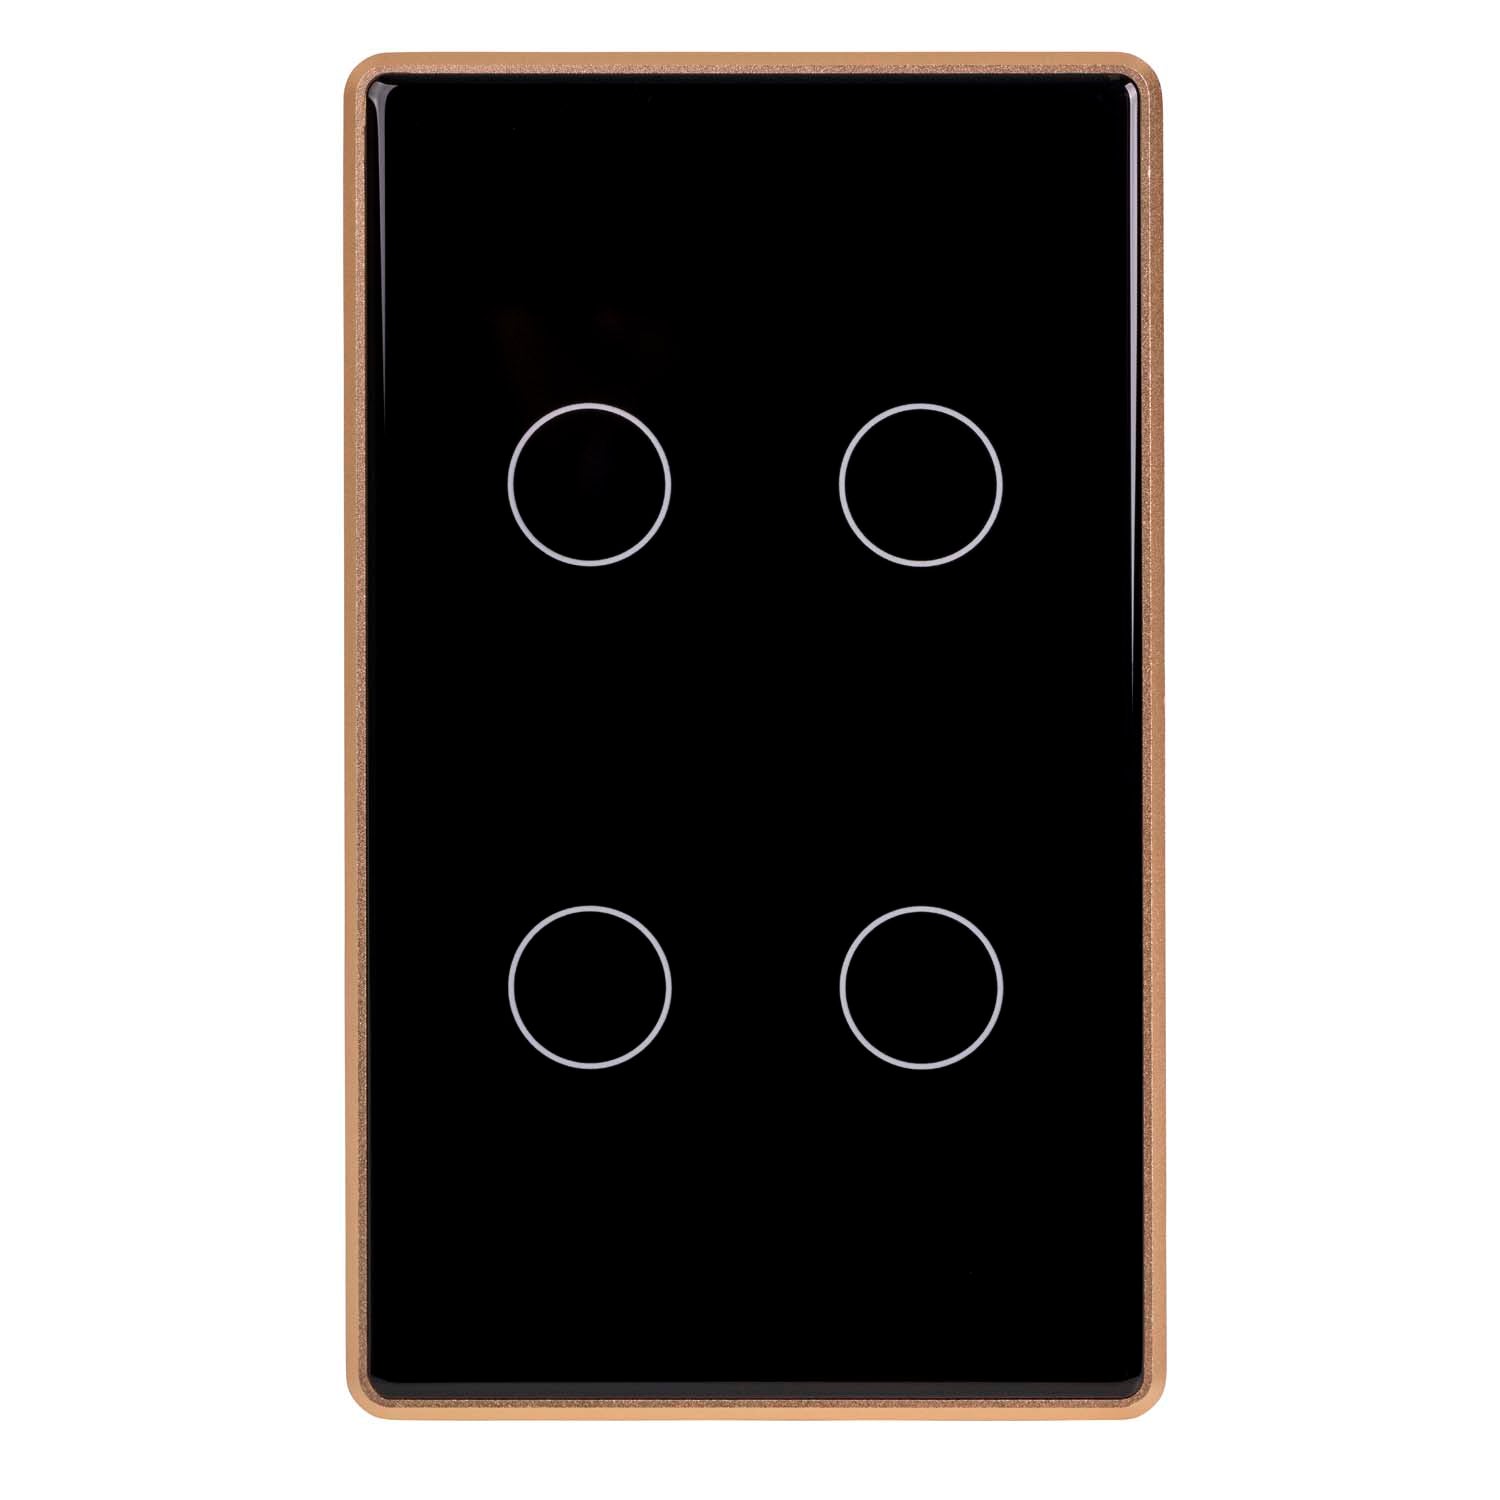 HV9220-4 - Wifi 4 Gang Black with Gold Trim Wall Switch